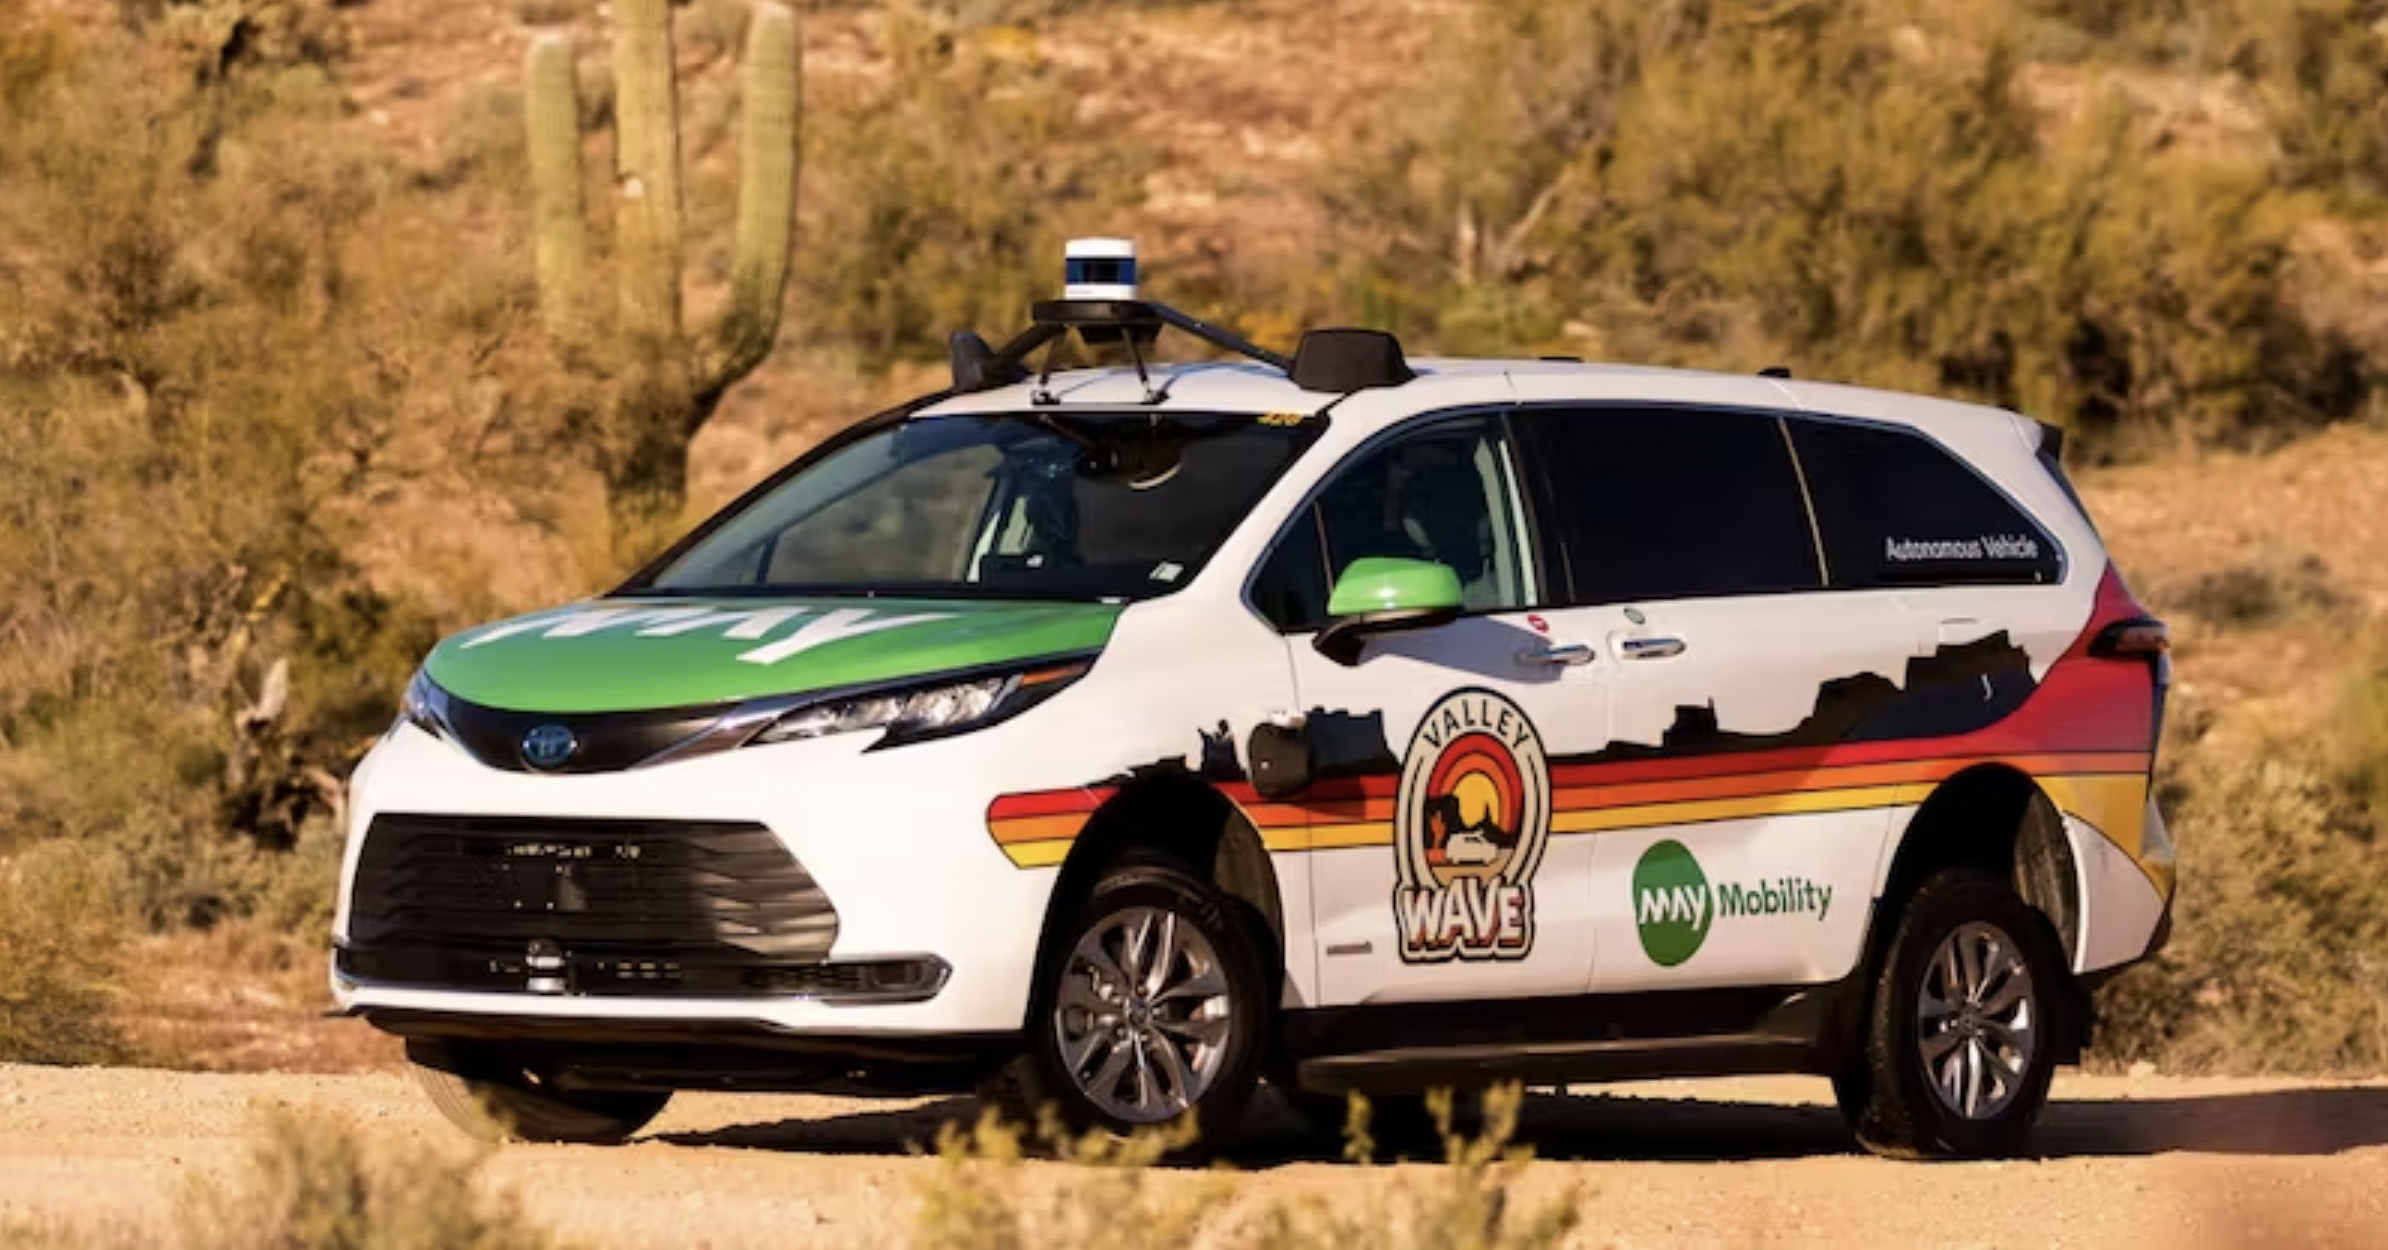 May Mobility Begins Rider-Only Autonomous Service in Arizona